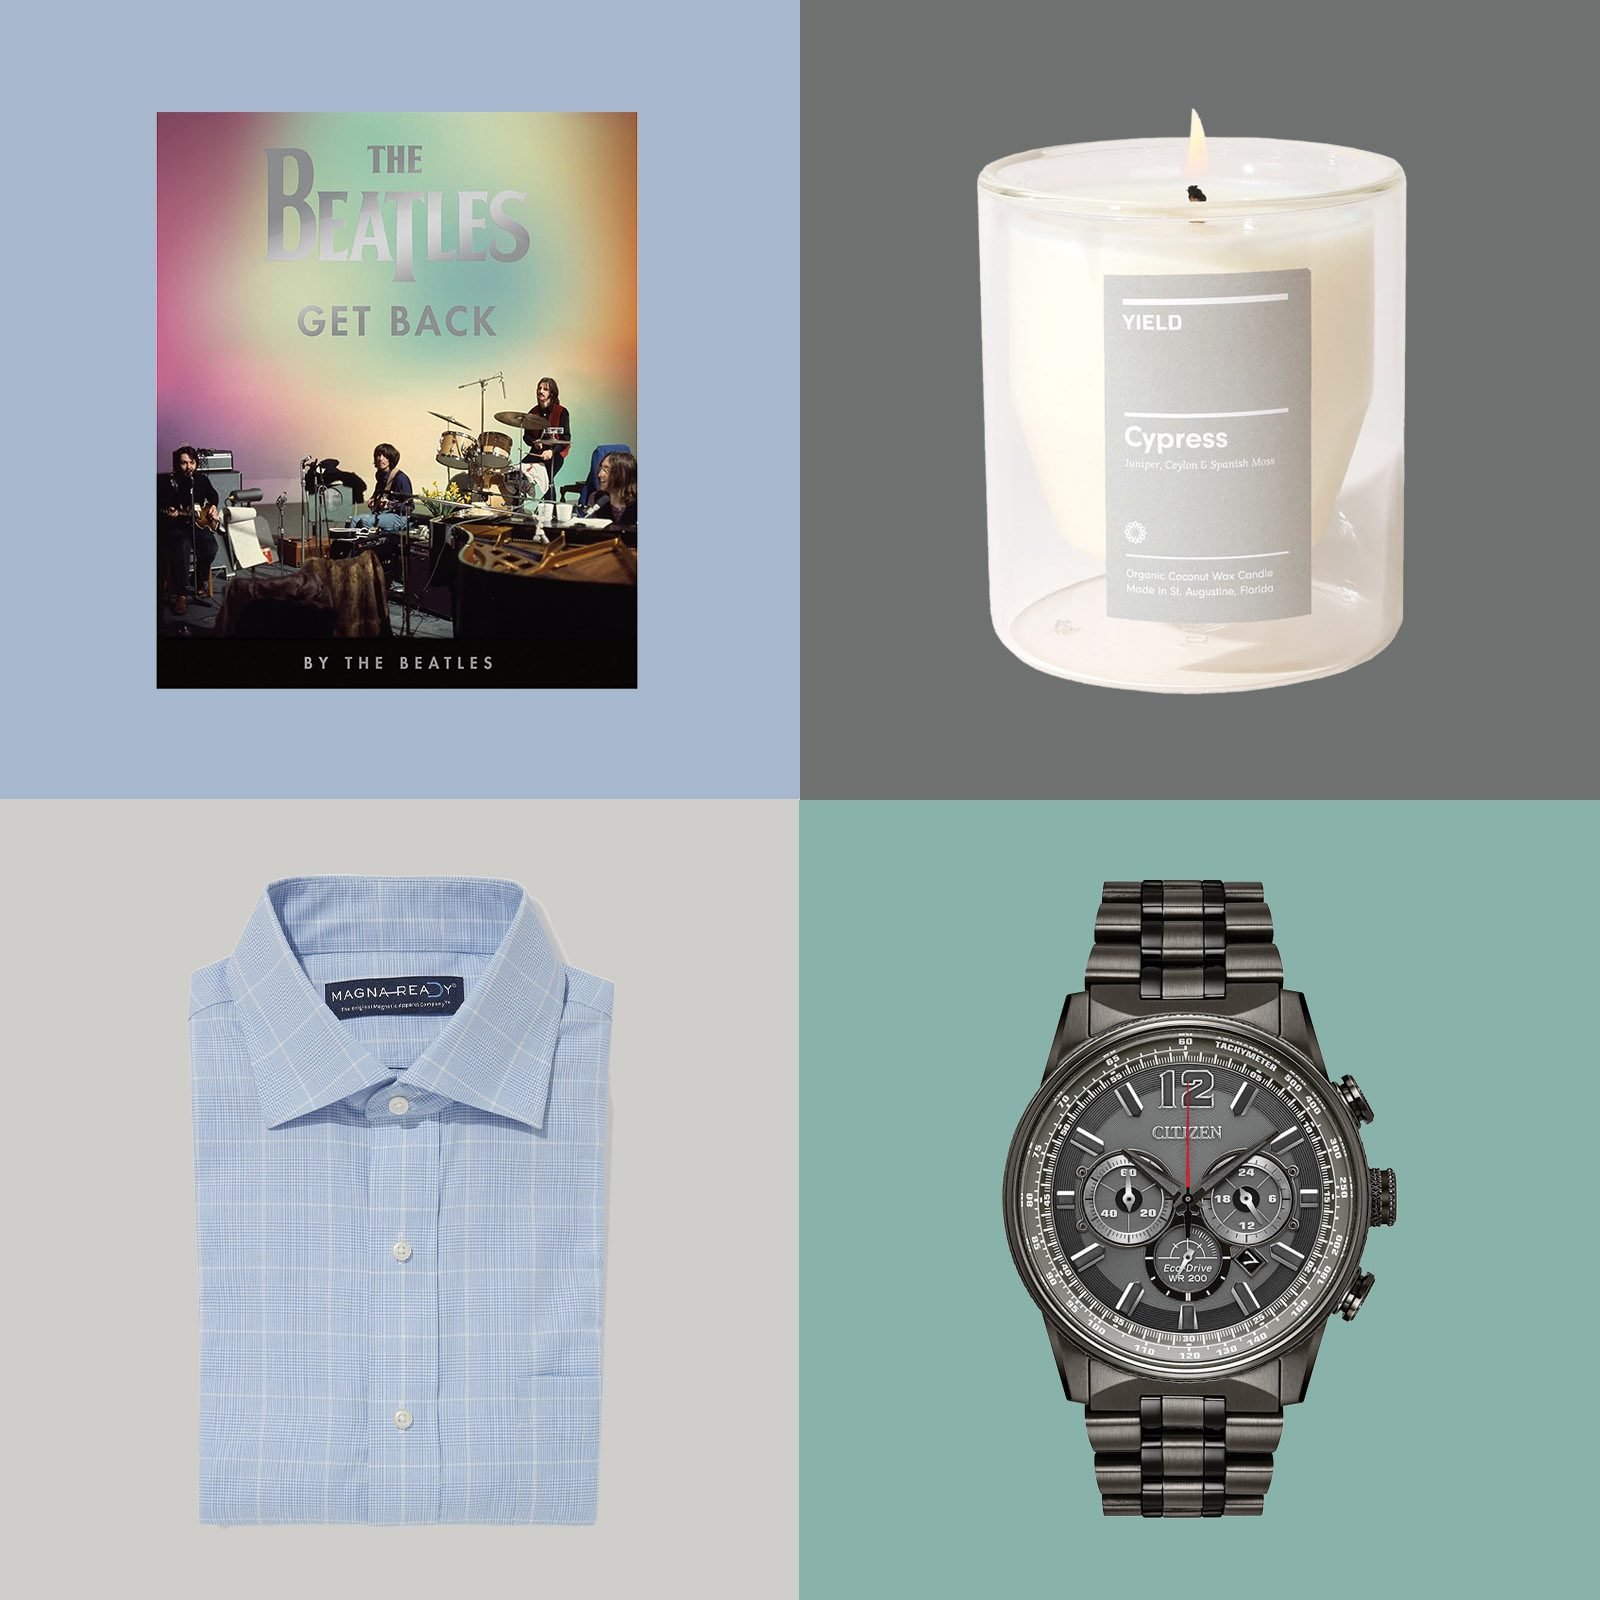 68 Gifts for Husbands That He’ll Actually Use